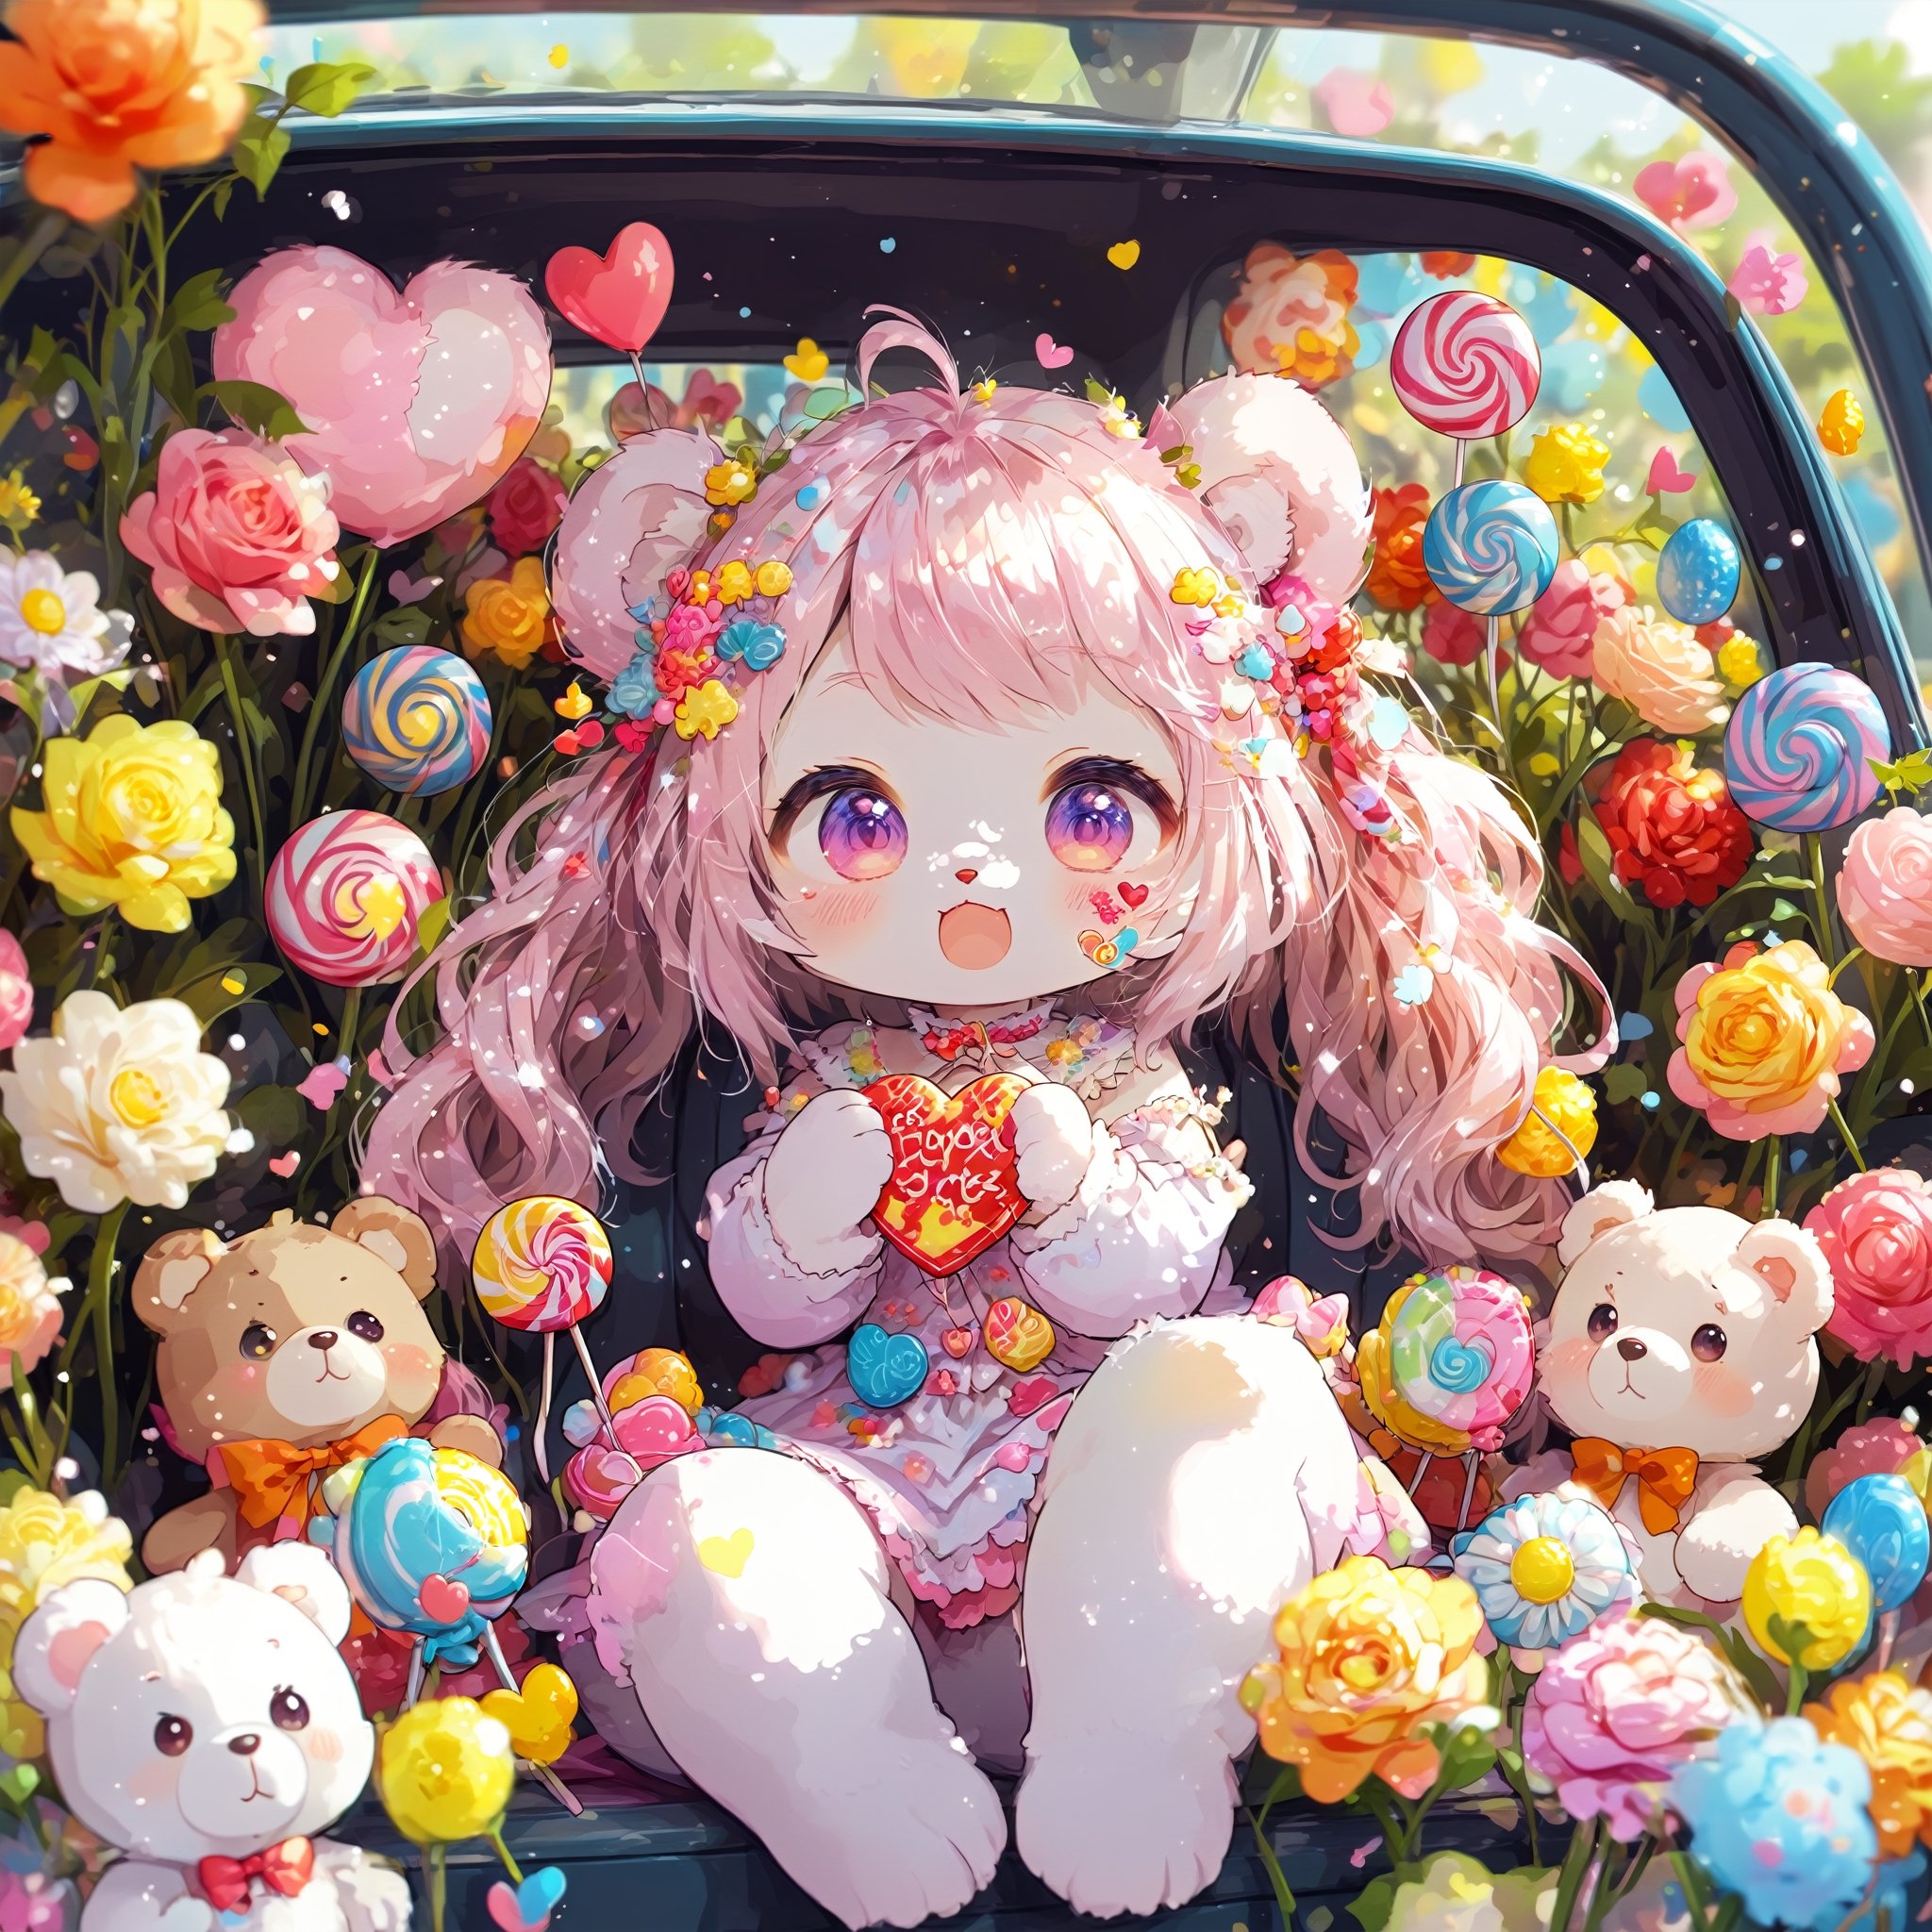 Pastel Candy Art,cute furry Teddy bear,Emphasize the unique synthesis of styles, in car,
heart \(symbol\),Candy\(symbol\), 
,colorful,chibi emote style,artint,sticker,furry,furry girl